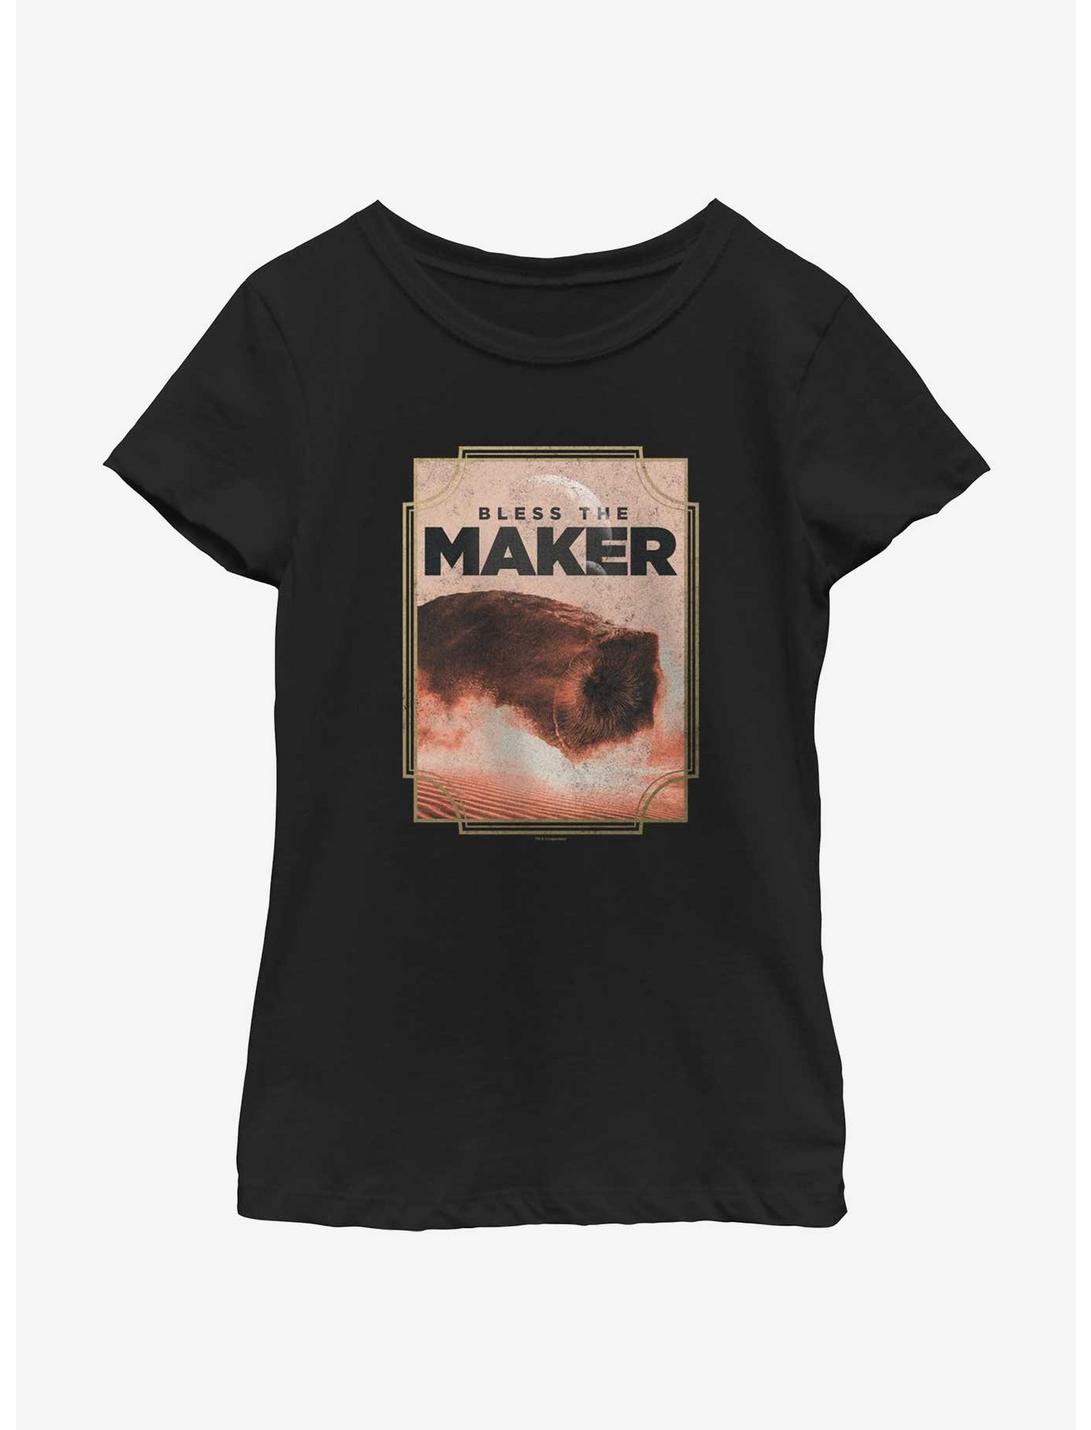 Dune: Part Two Bless The Maker Youth Girls T-Shirt, BLACK, hi-res